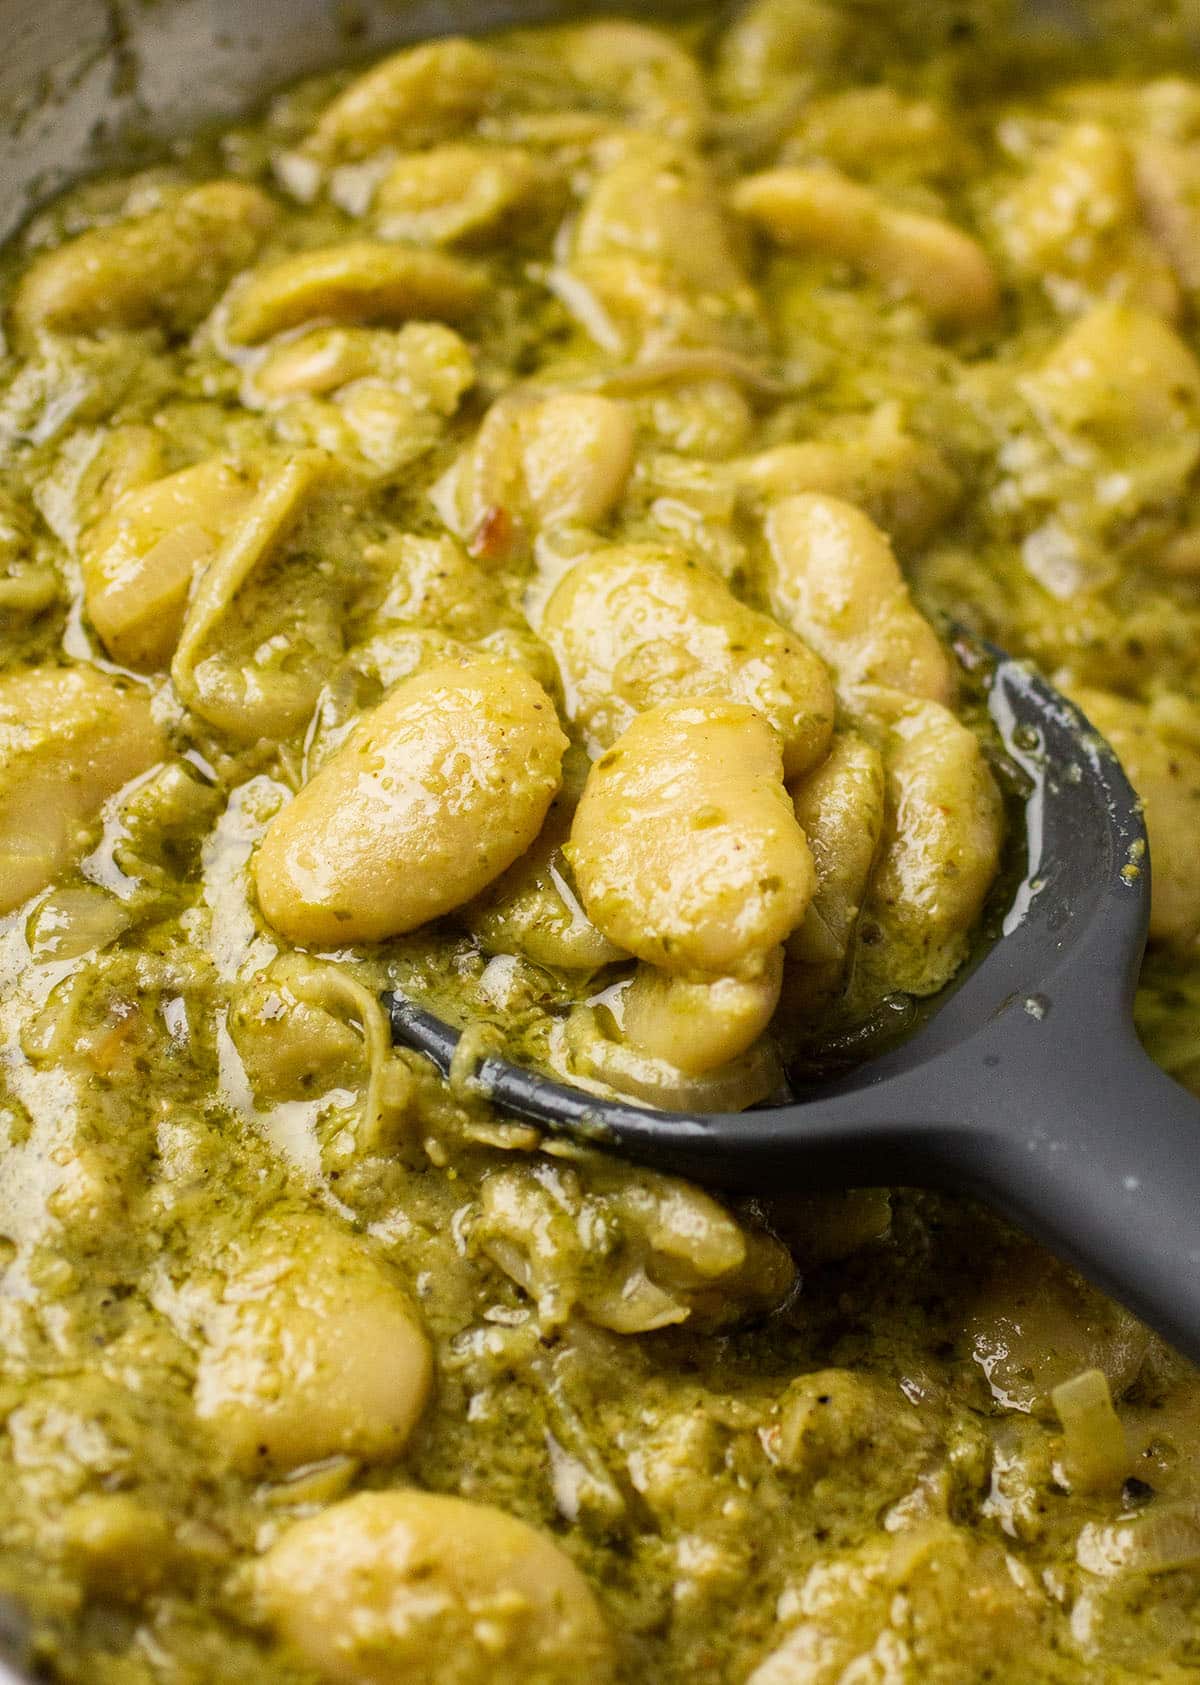 Black spatula stirring butter beans and pesto together.